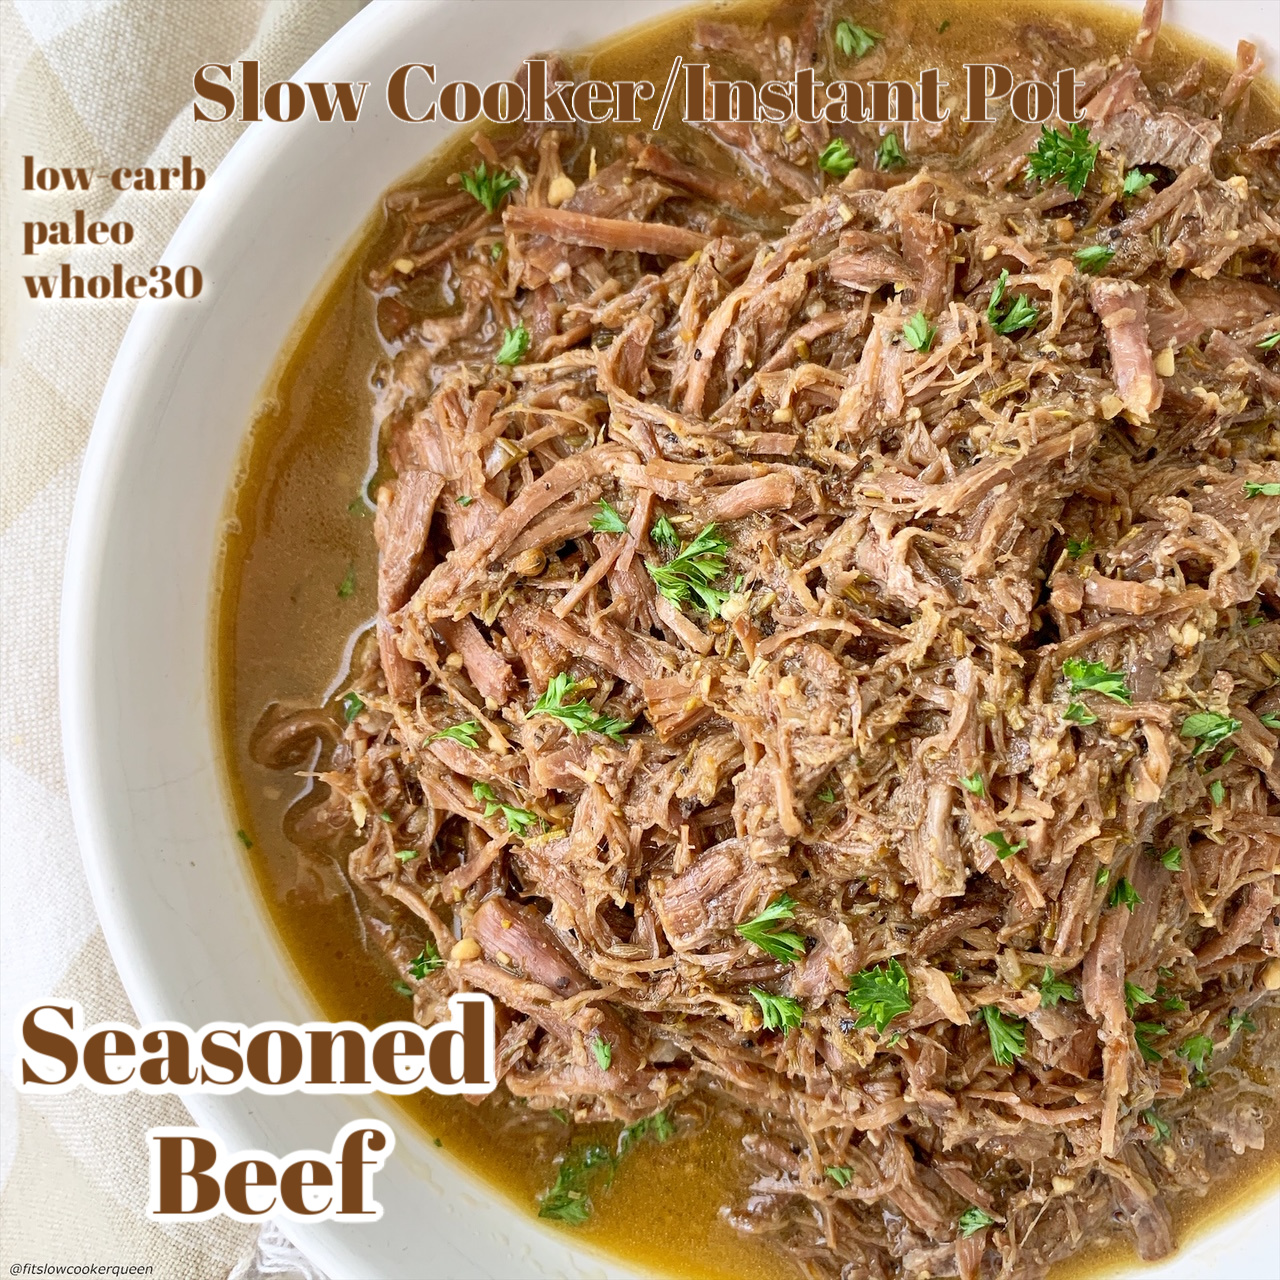 cover pic for Instant PotSlow Cooker Seasoned Beef (Low-Carb, Paleo, Whole30)